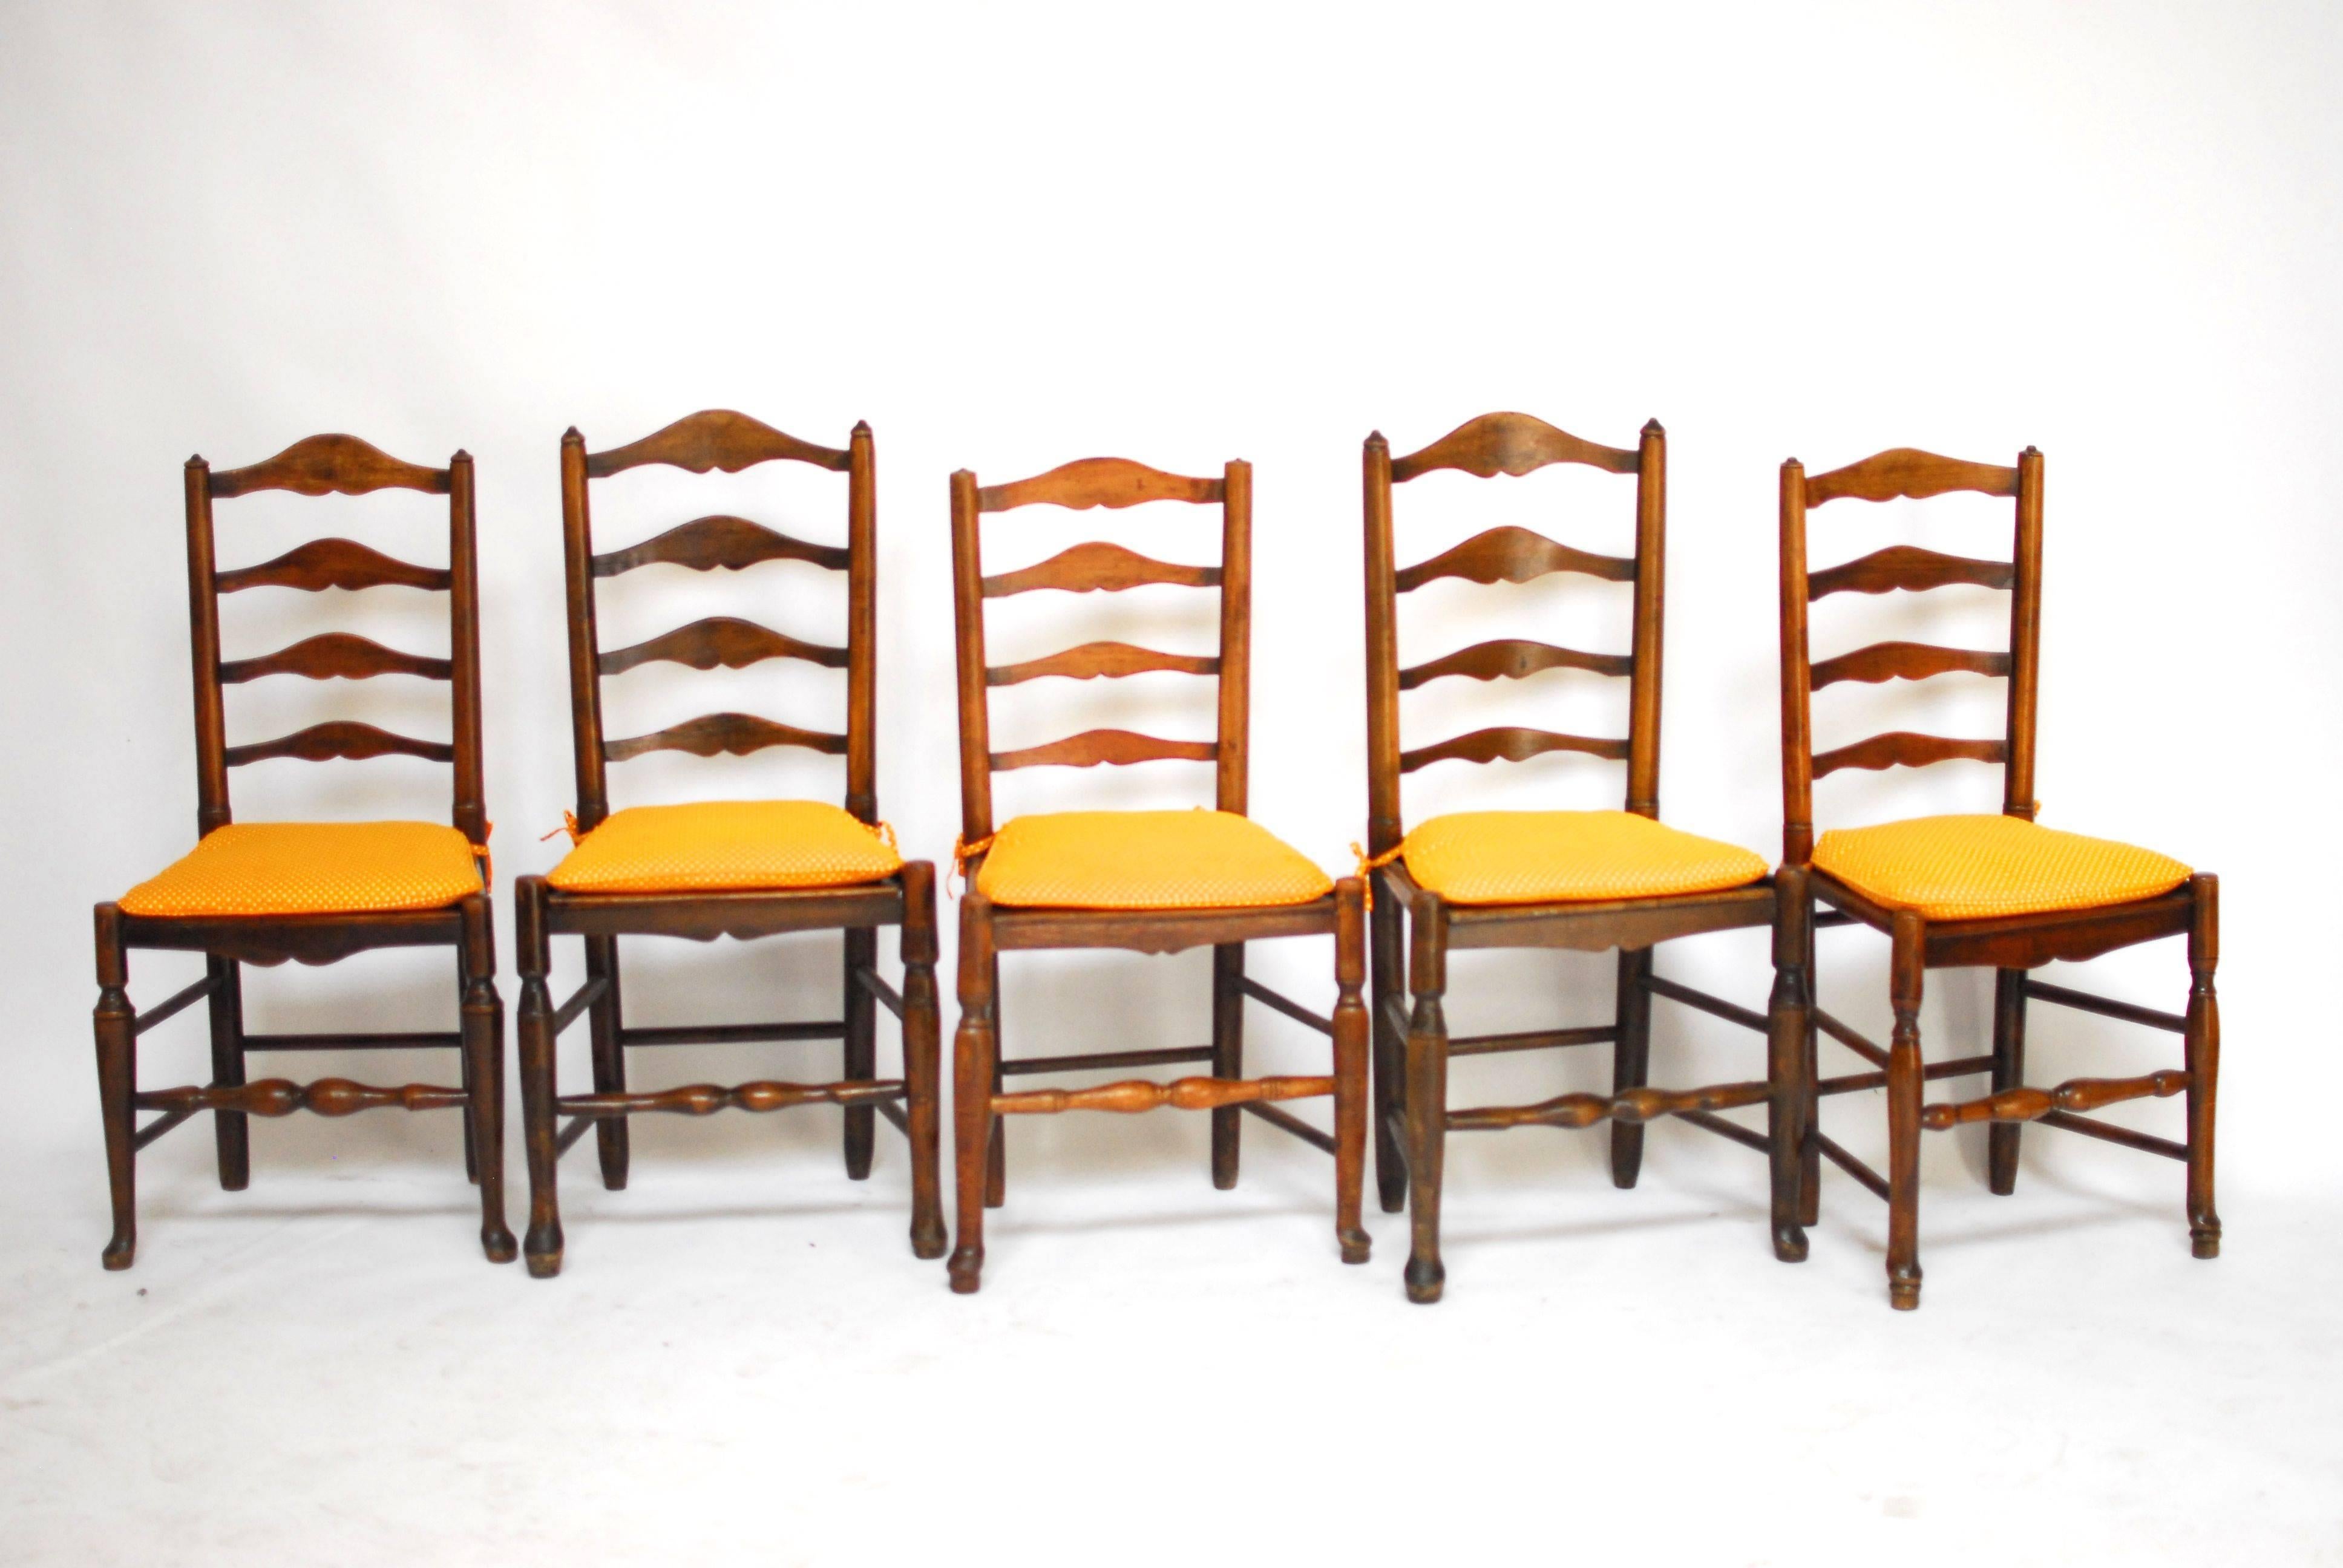 A set of five, rustic English country ladder back chairs from the 1850s made of elm and ash. Each chair has four shaped slats with tapered stiles and small finials on top. They have wood plank seats with turned legs and front stretchers sitting on